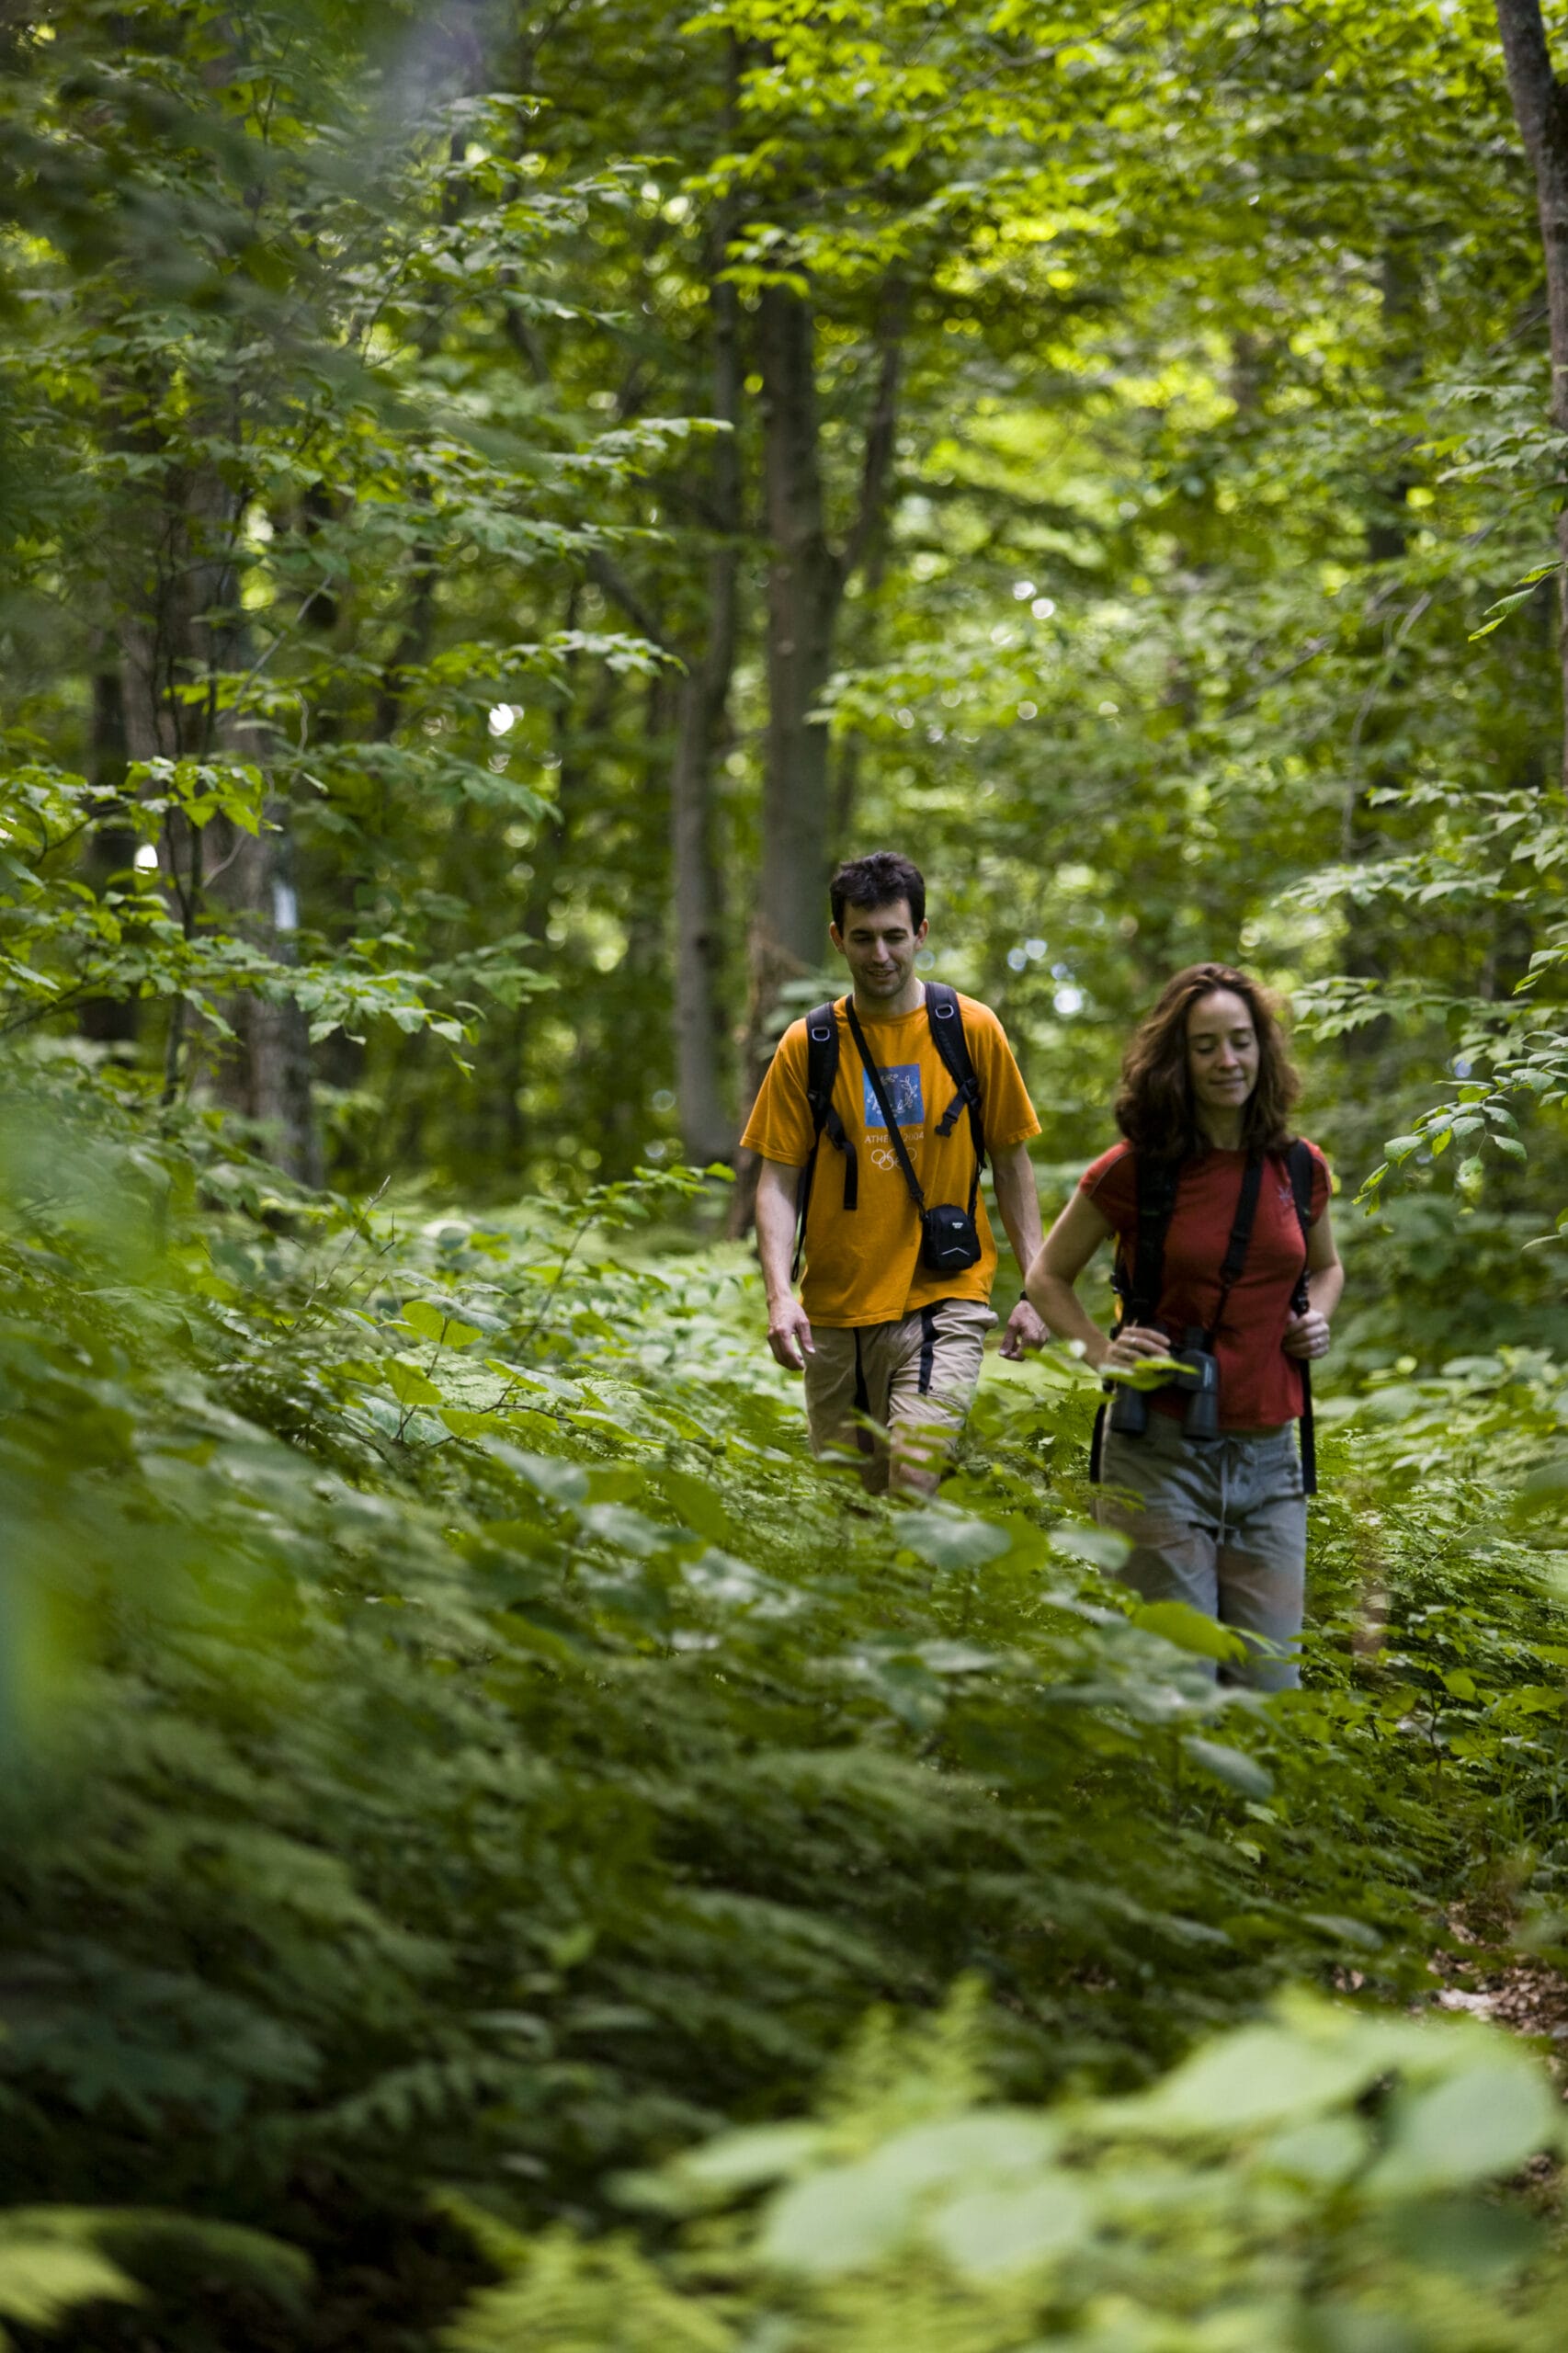 A couple walking through a wooded area.